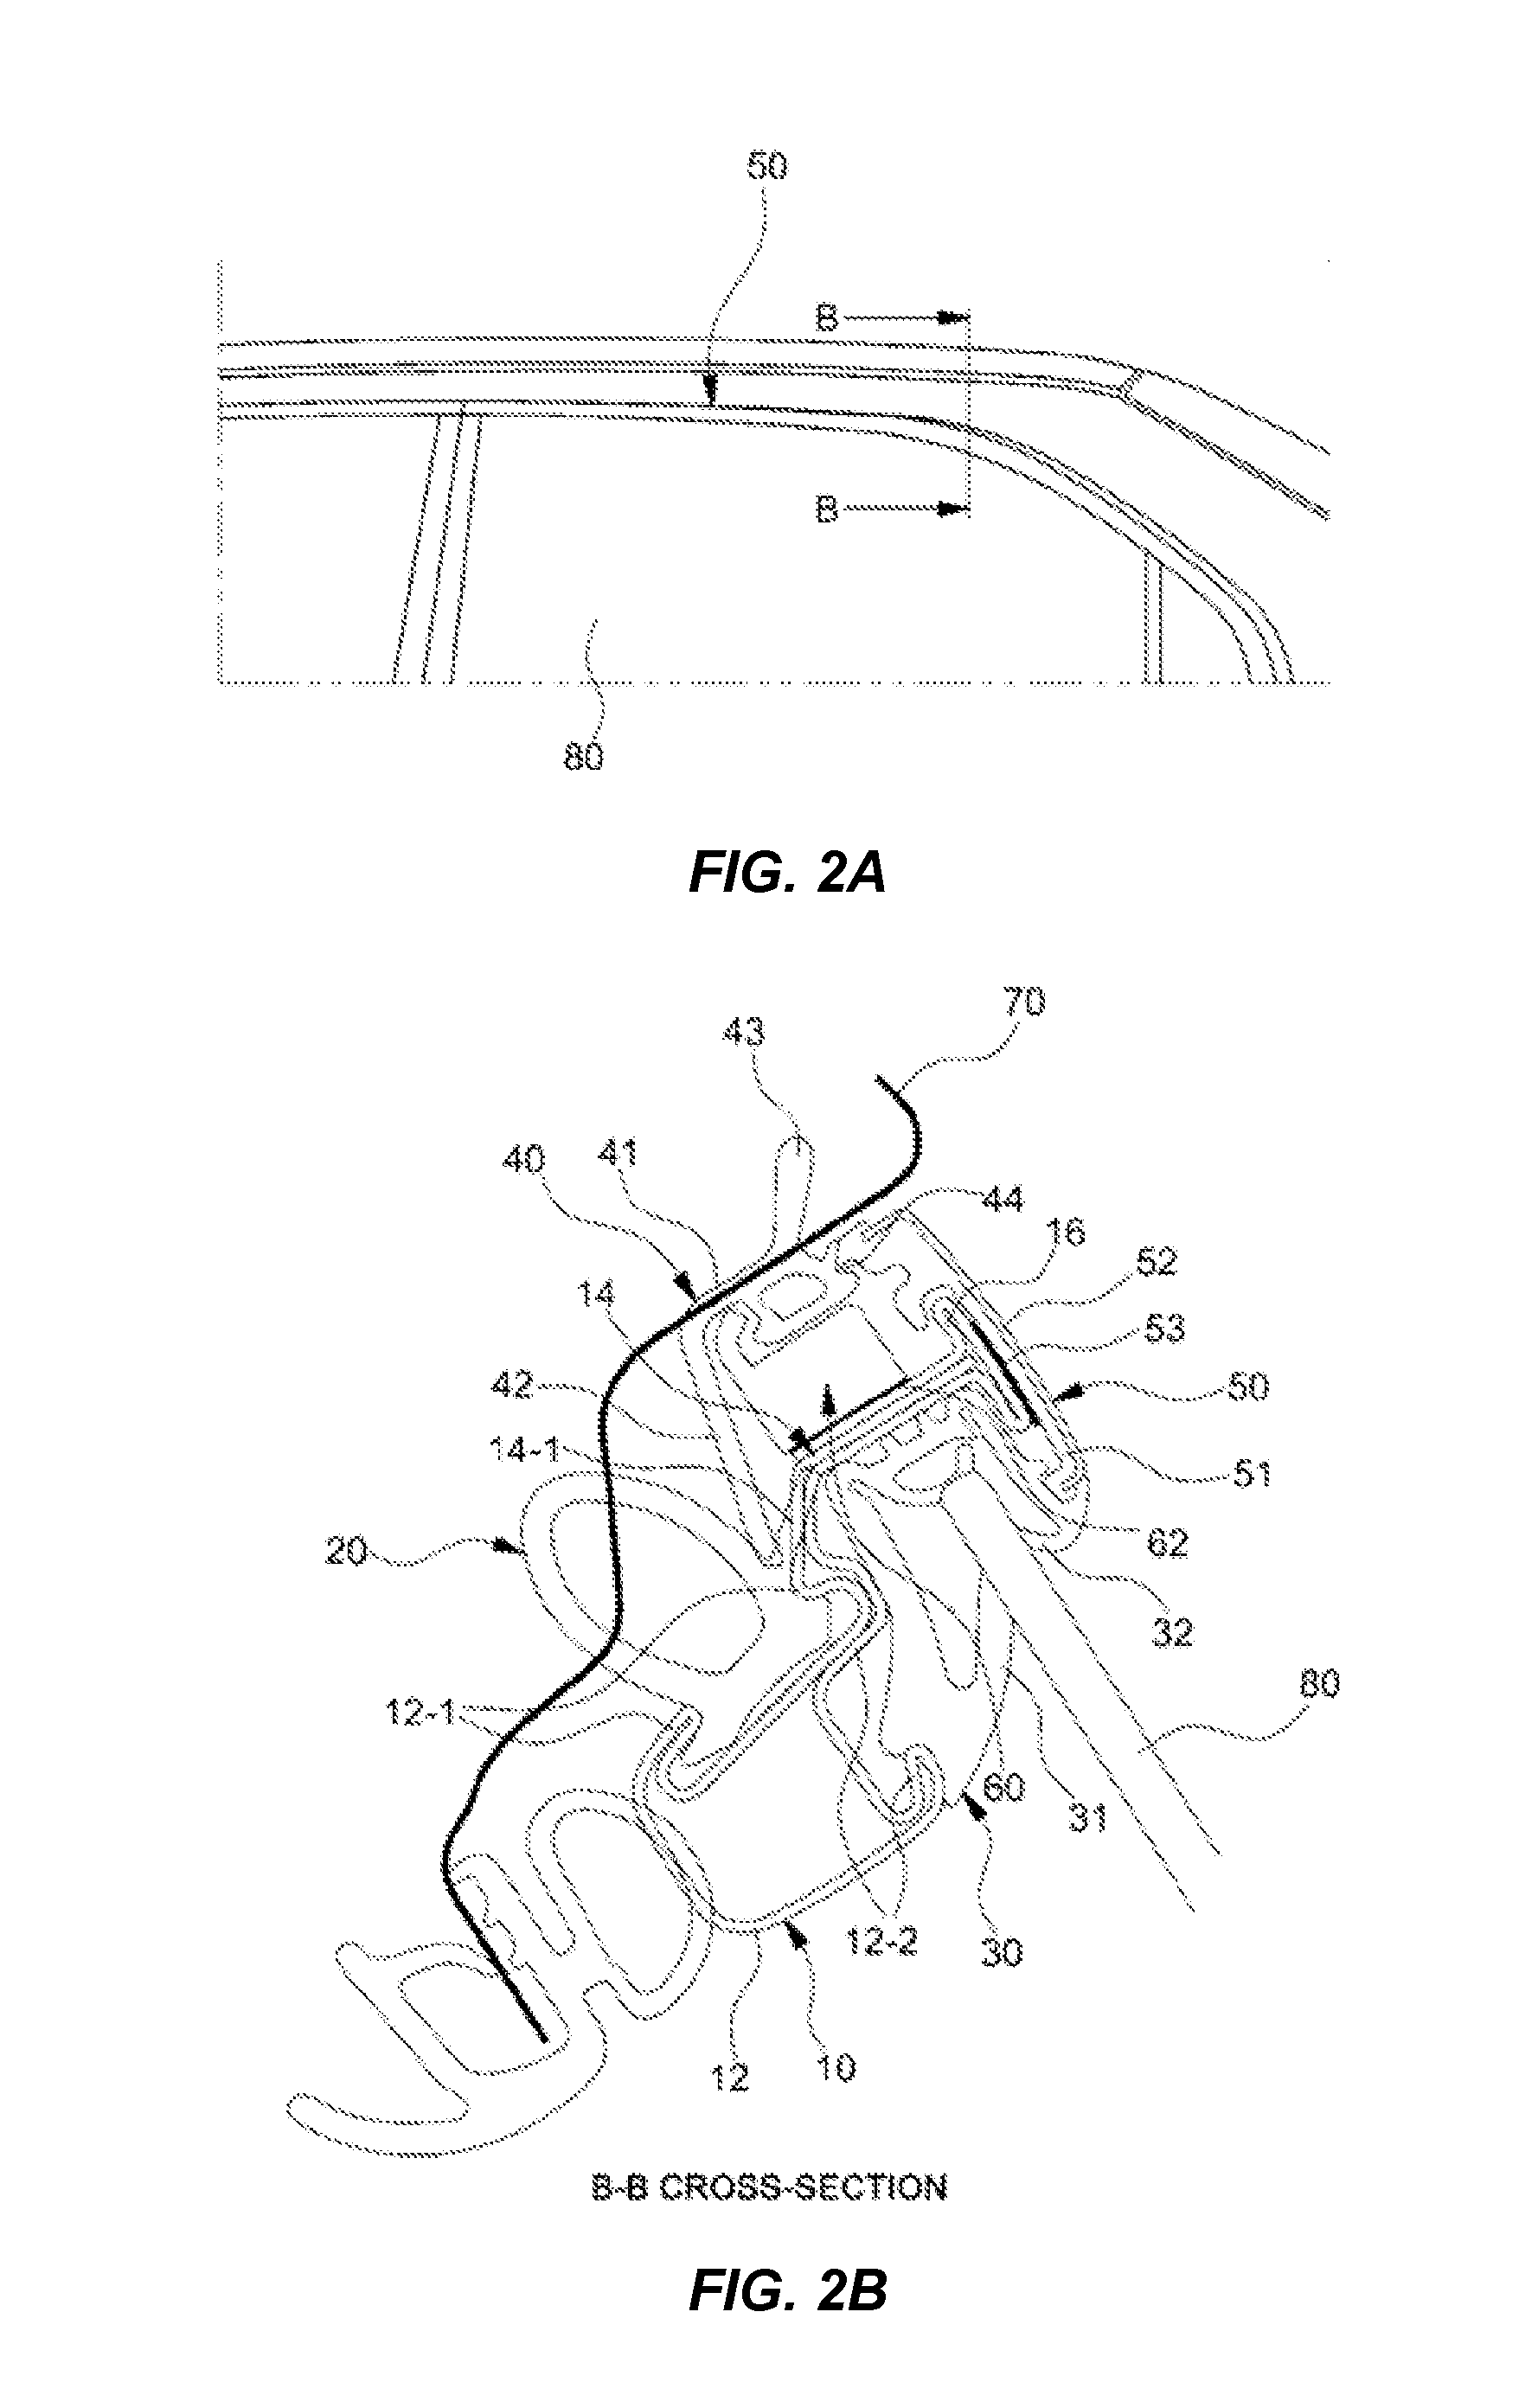 Door frame and molding device for vehicle